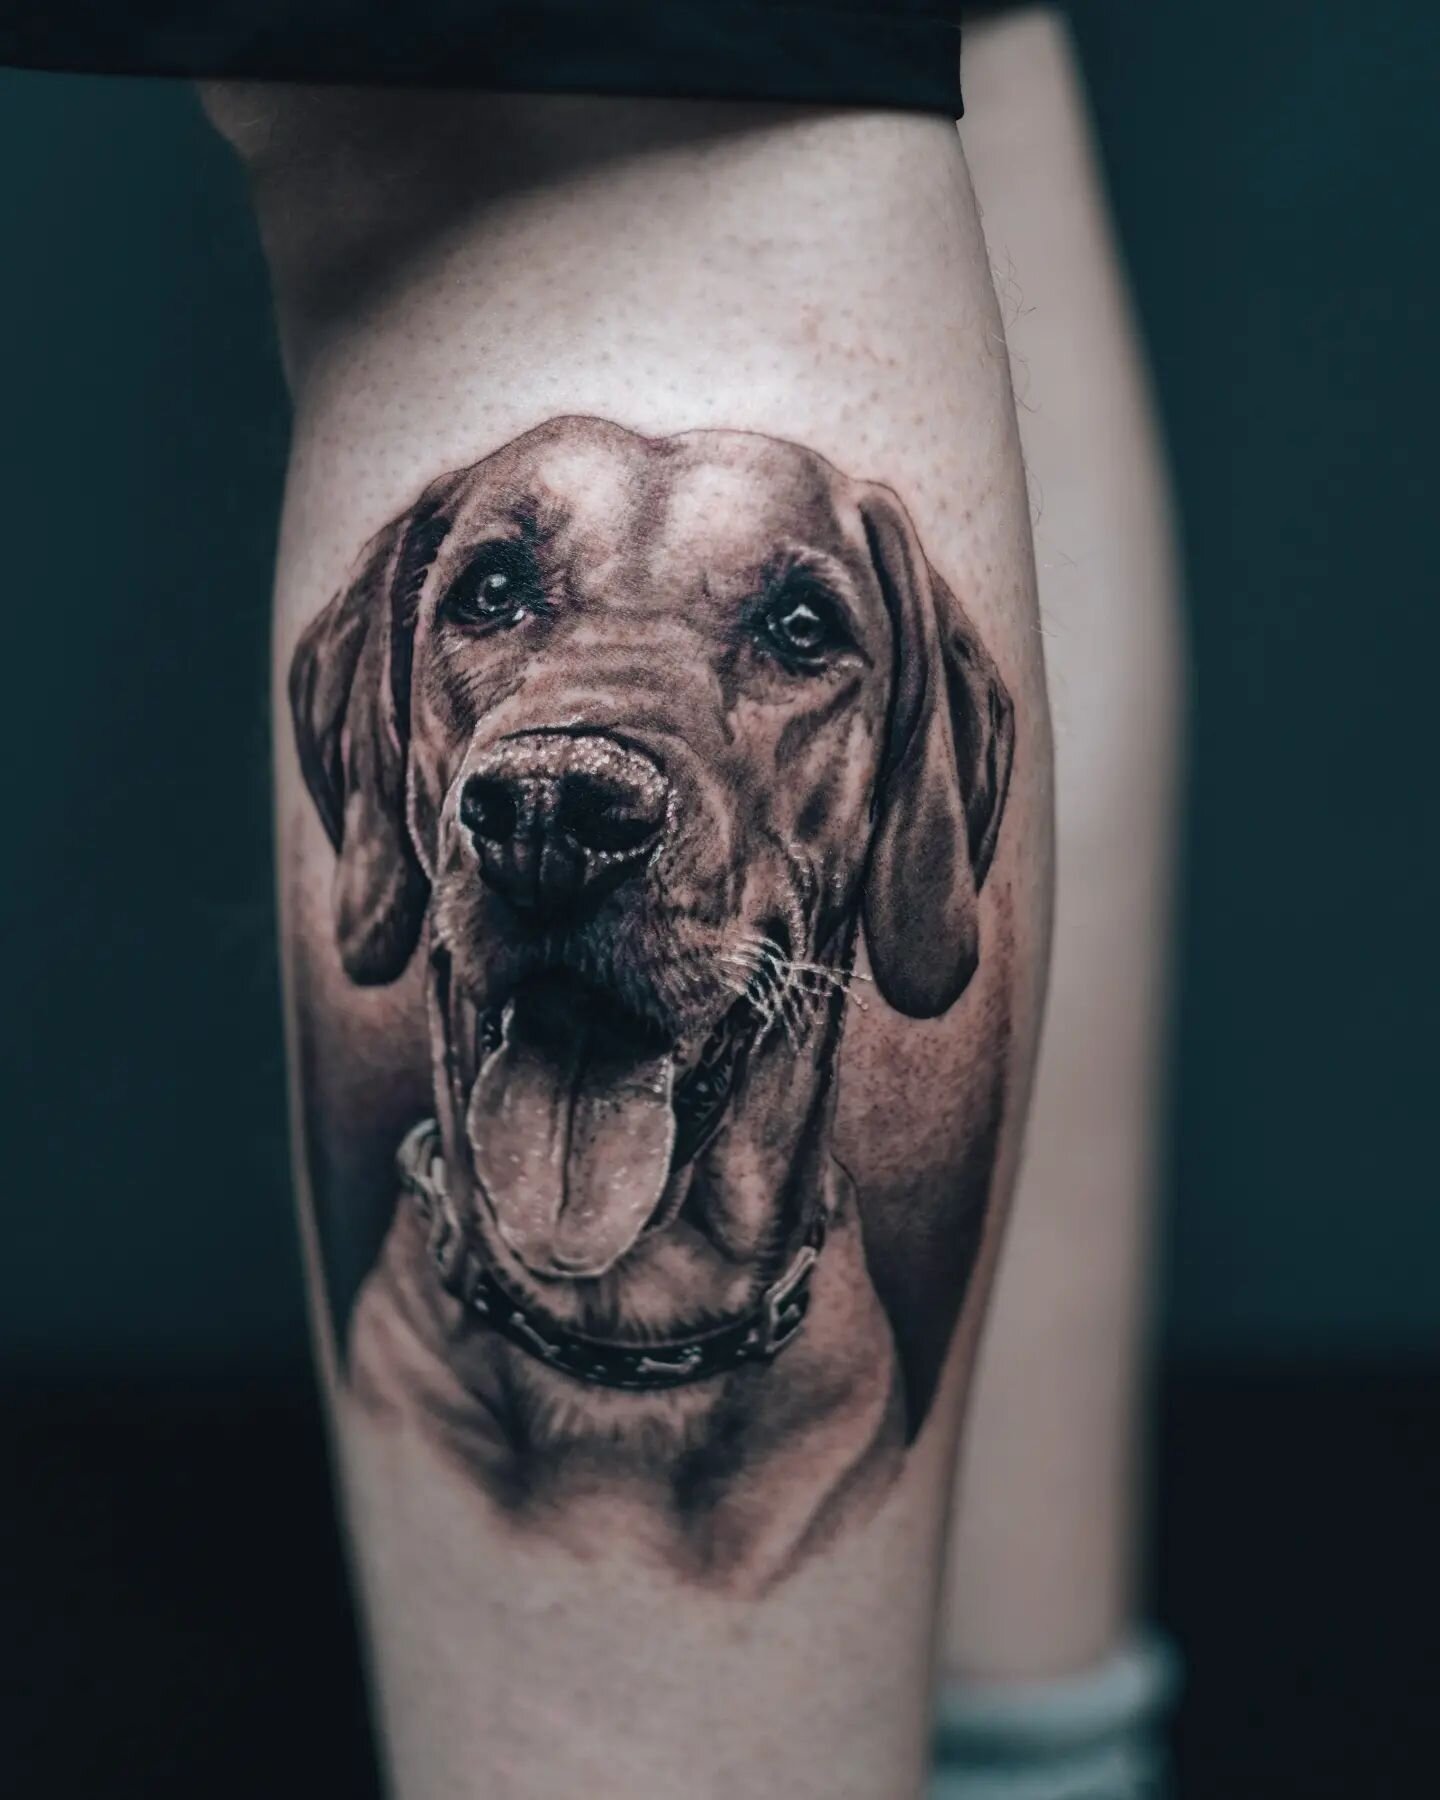 Our passion for inking your pet portraits parallels our love for (really) good coffee ❤️. Meet Roxy - our freshly inked furry friend completed in house today by @tattooartistlukerudden. This art form is so much more than just skin-deep for us 😍. Exp